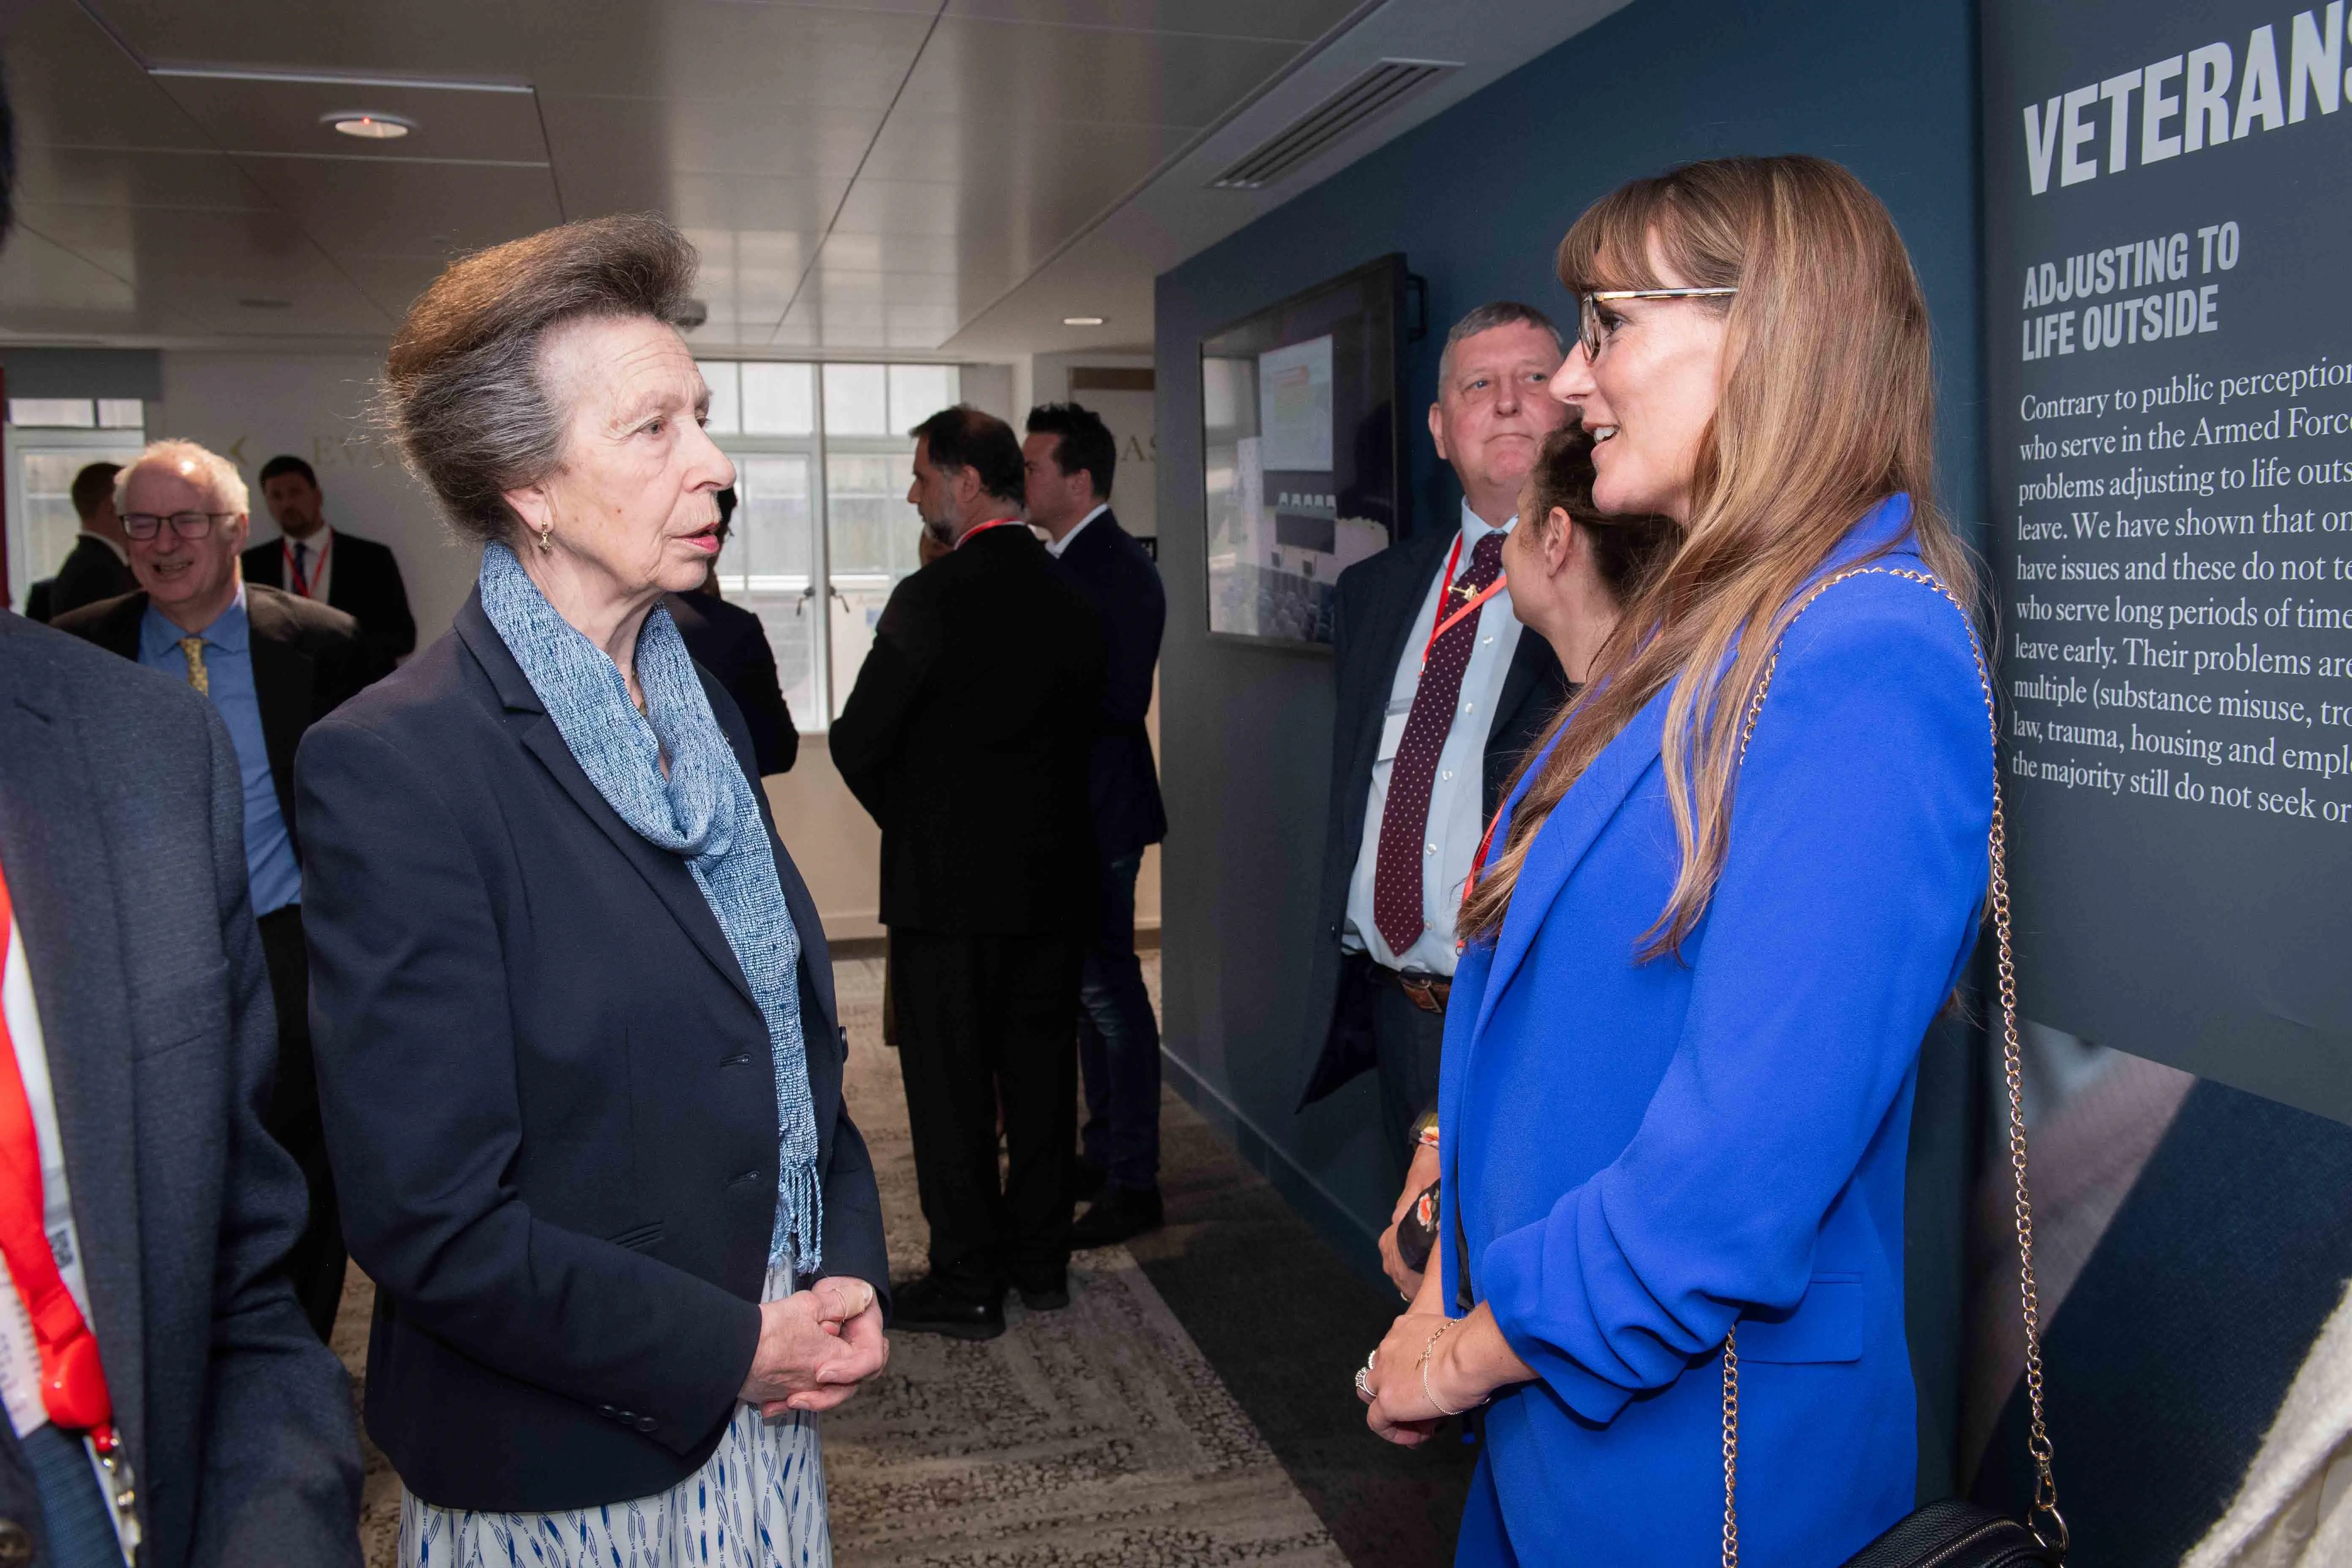 Her Royal Highness speaking with Dr Marie-Louise Sharp, Senior Research Fellow at the King's Centre for Military Health Research, IoPPN